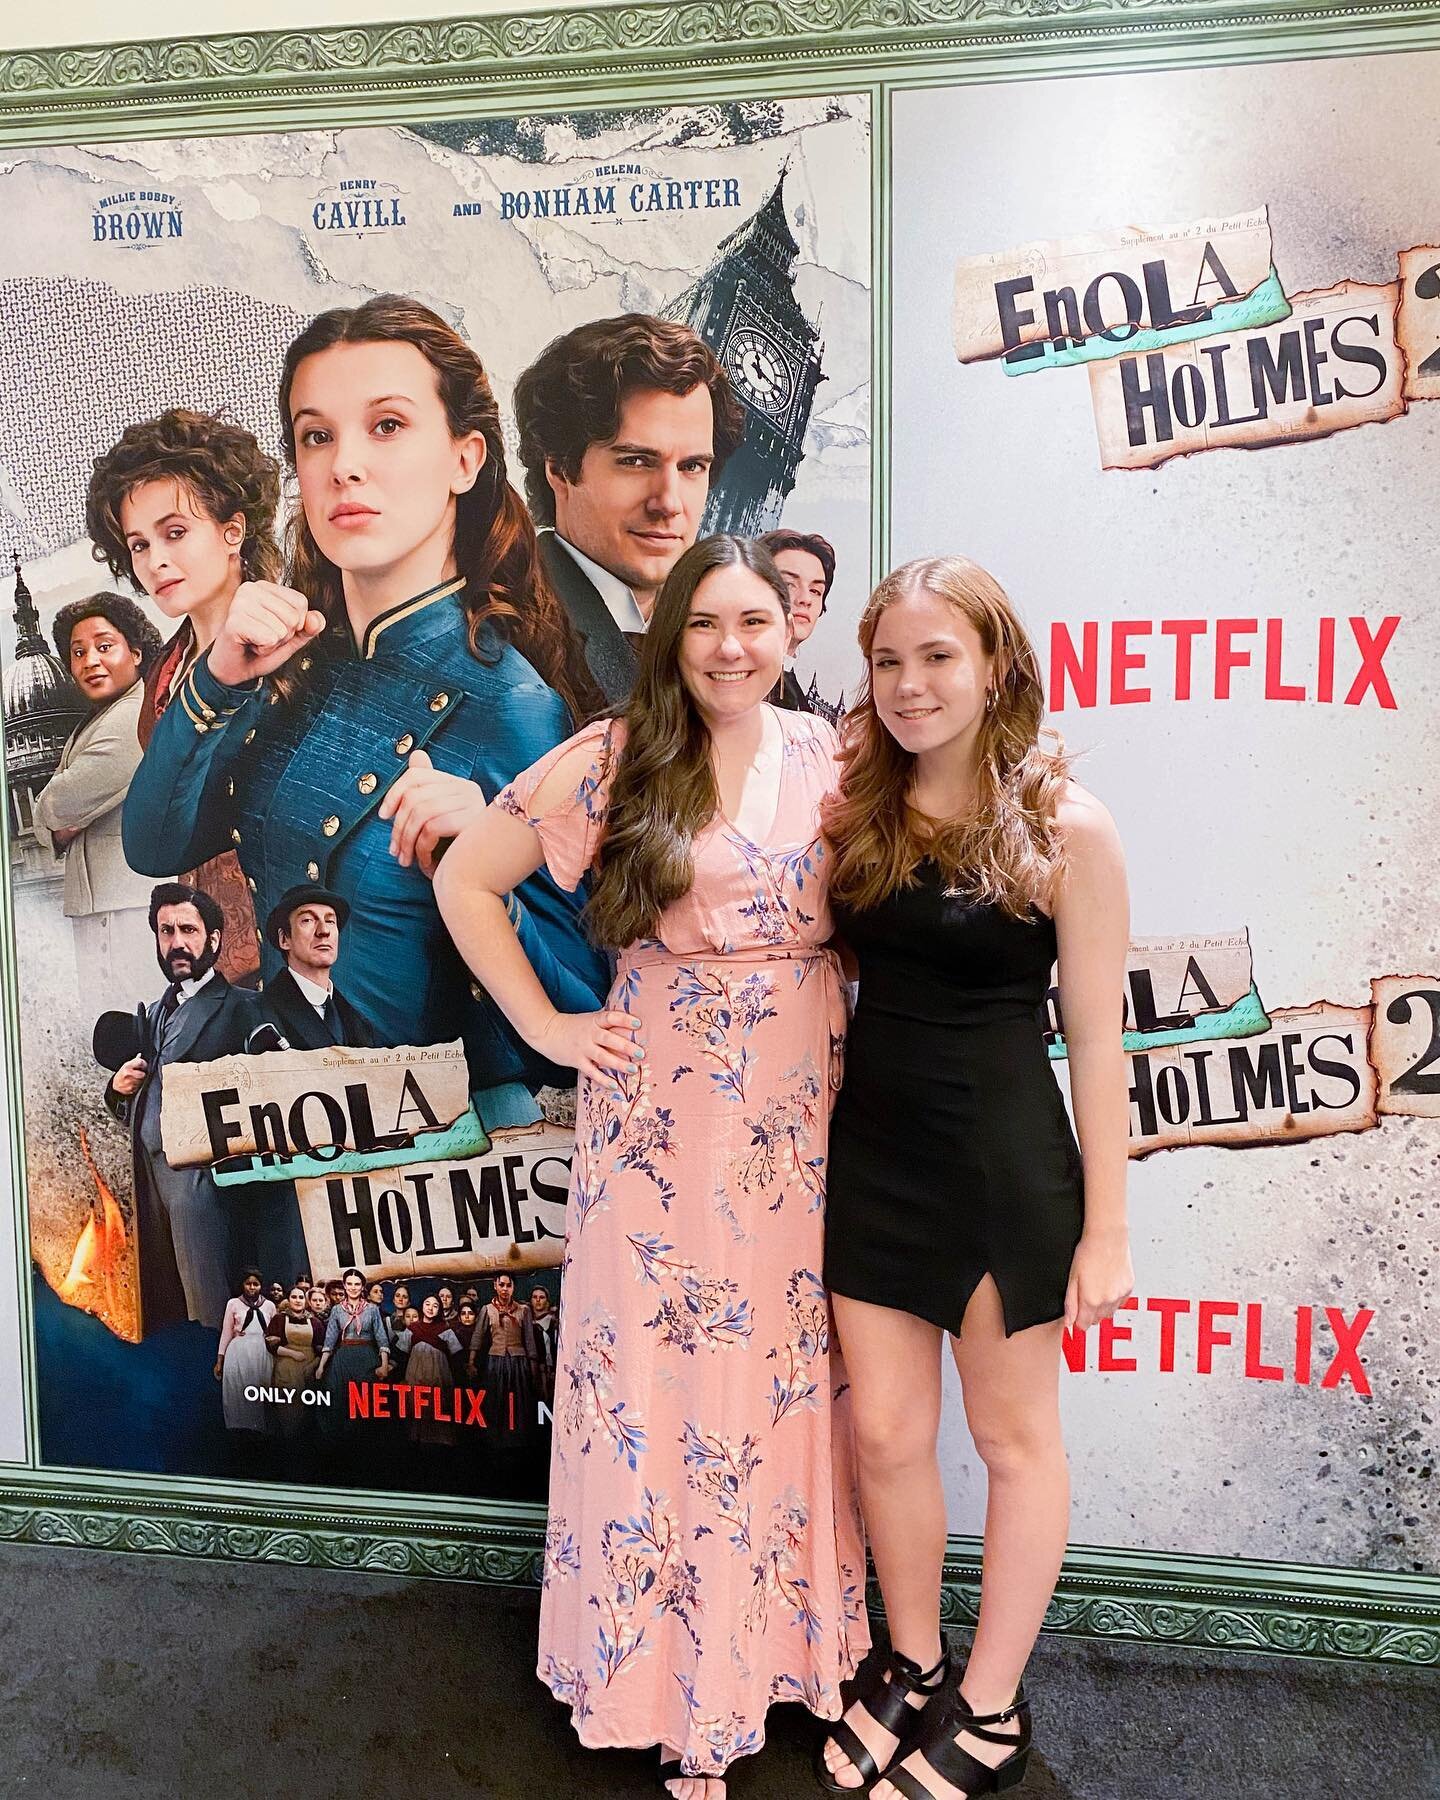 Had quite the weekend. Got to take my baby sister to the #EnolaHolmes2 premiere where she got to meet her favorite actress🥰 Thank you so much @colettelynn for making that happen, loved getting to see you! And then I got to see @thehughjackman on #br